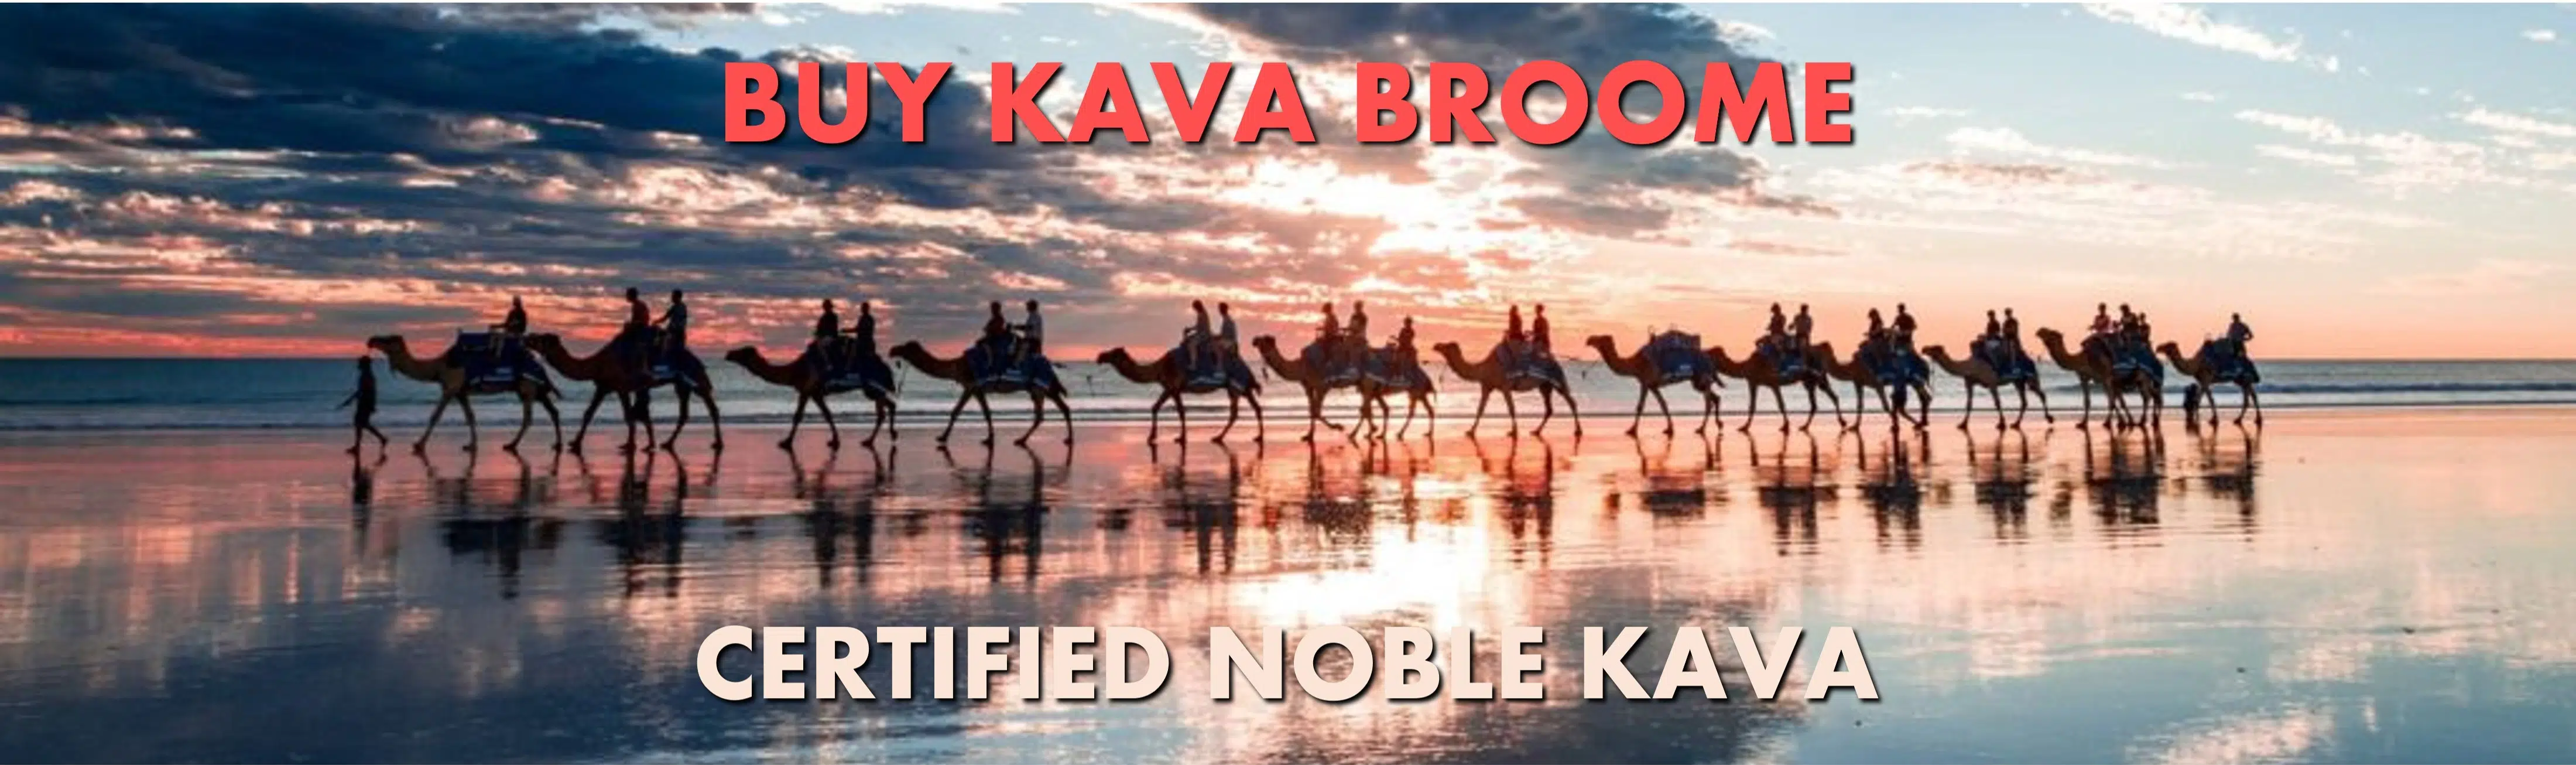 Camels on beachfront in Broome Western Australia with caption Buy Kava Broome Certified Noble Kava